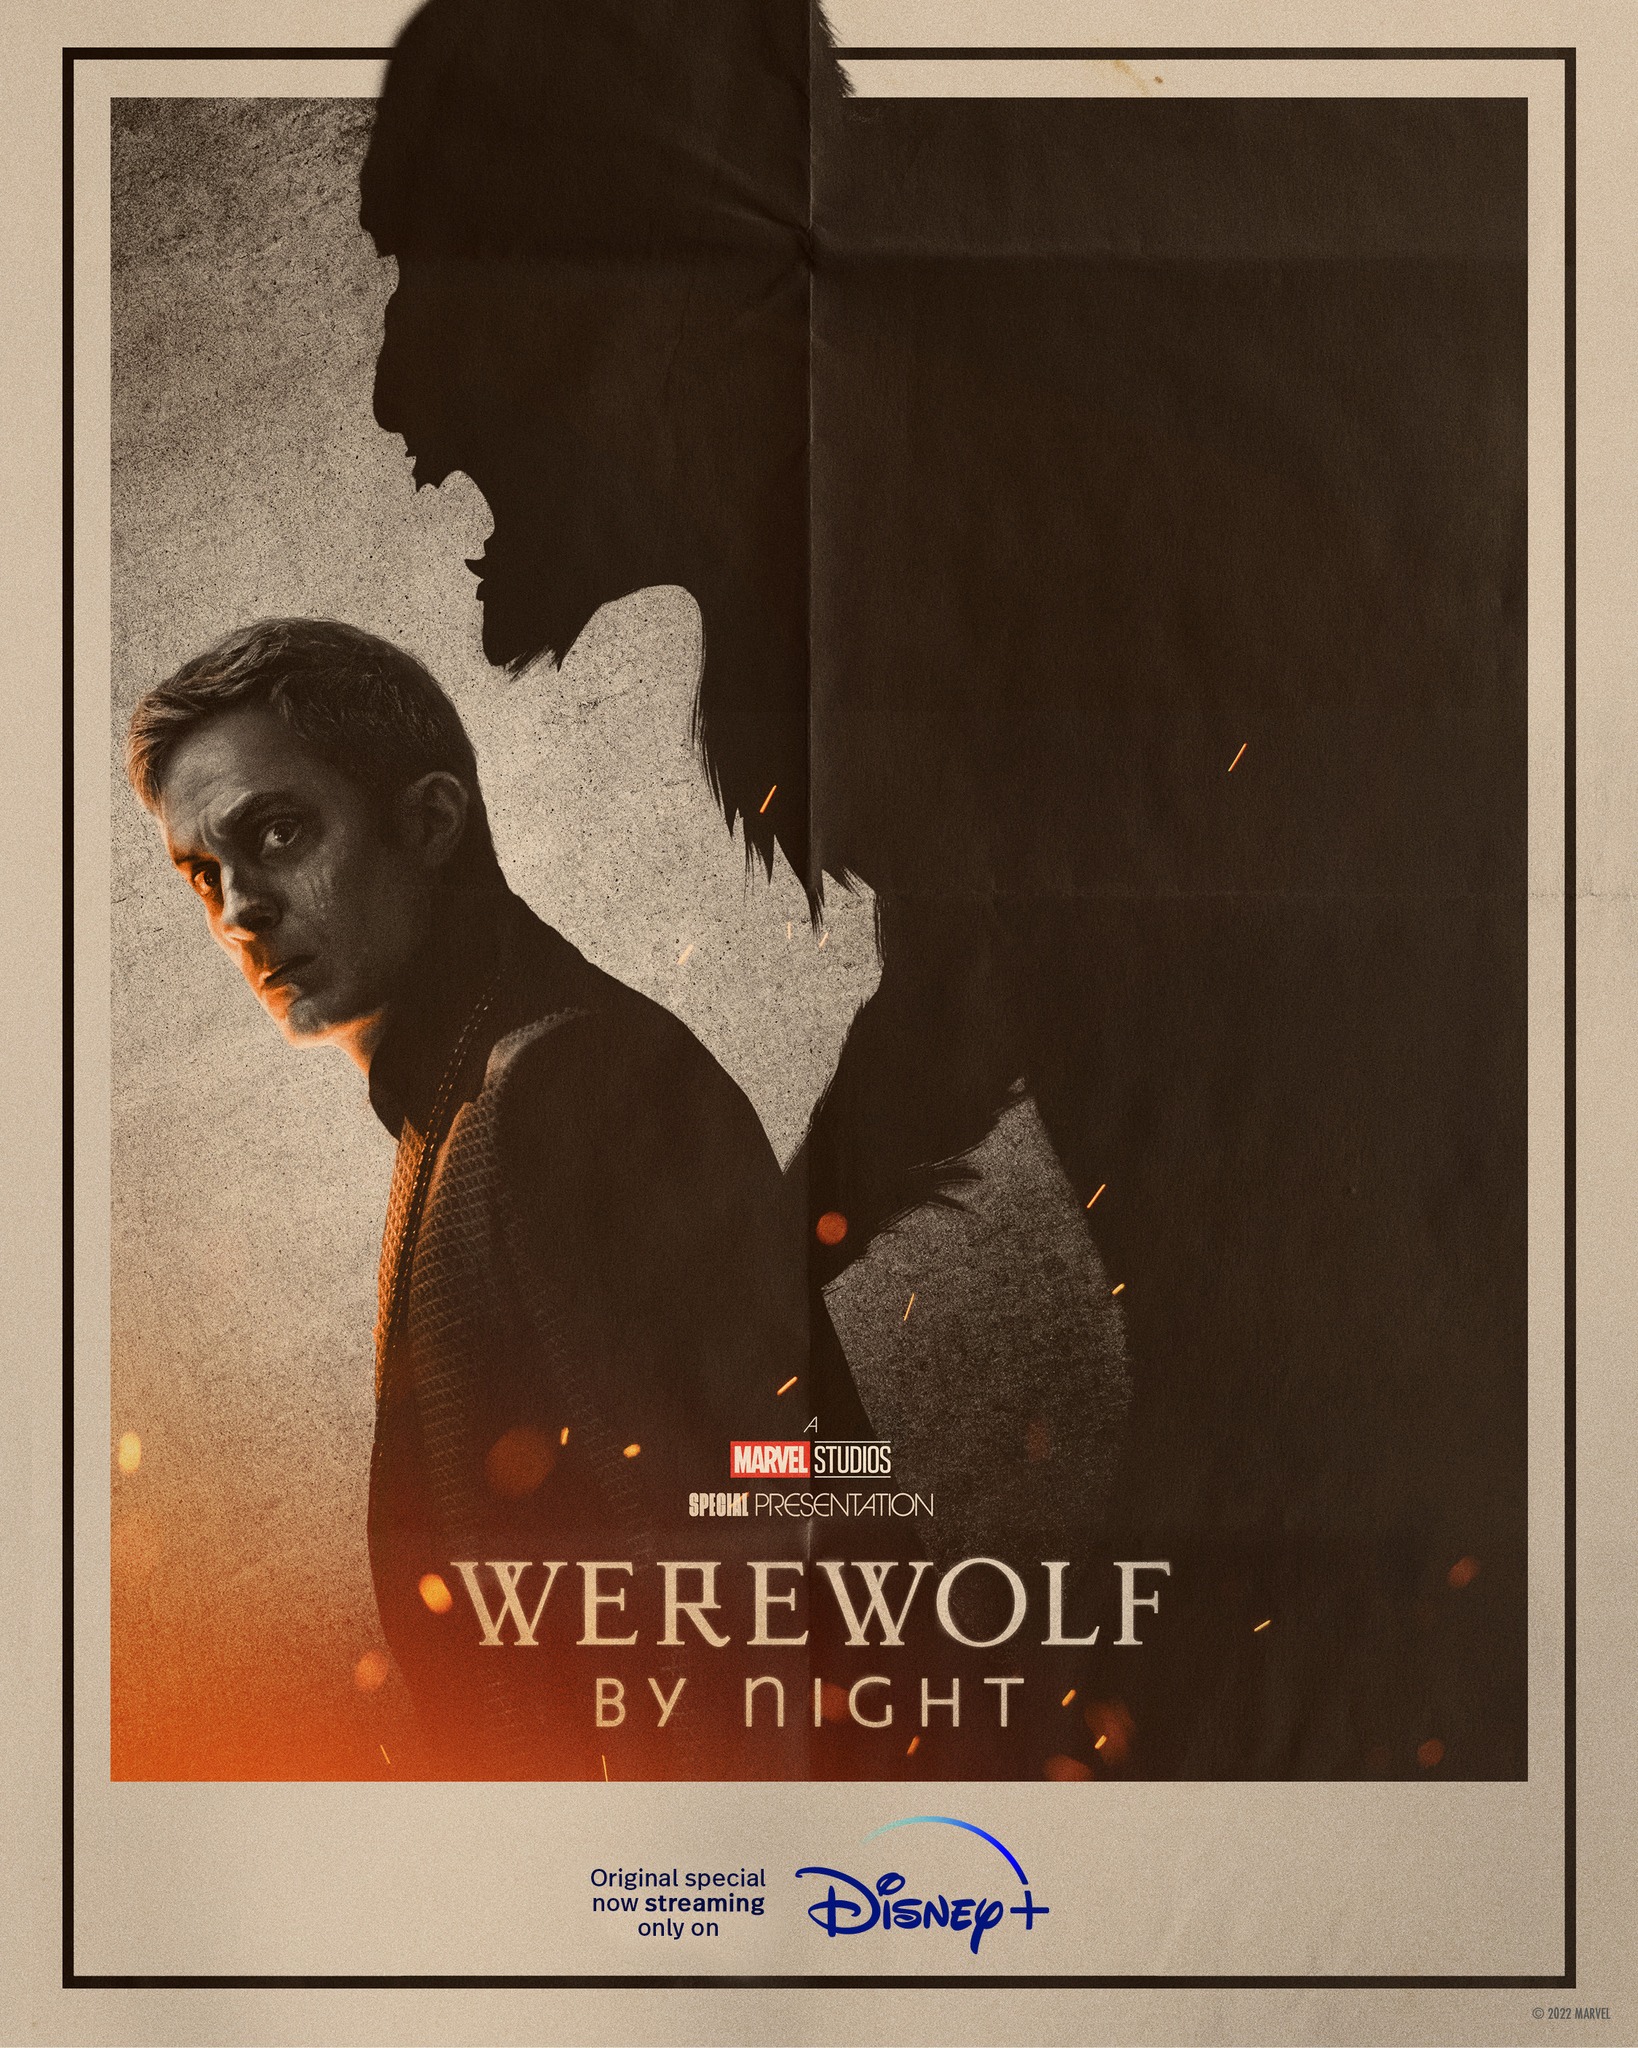 Really enjoyed Werewolf by Night and how it paid homage to old